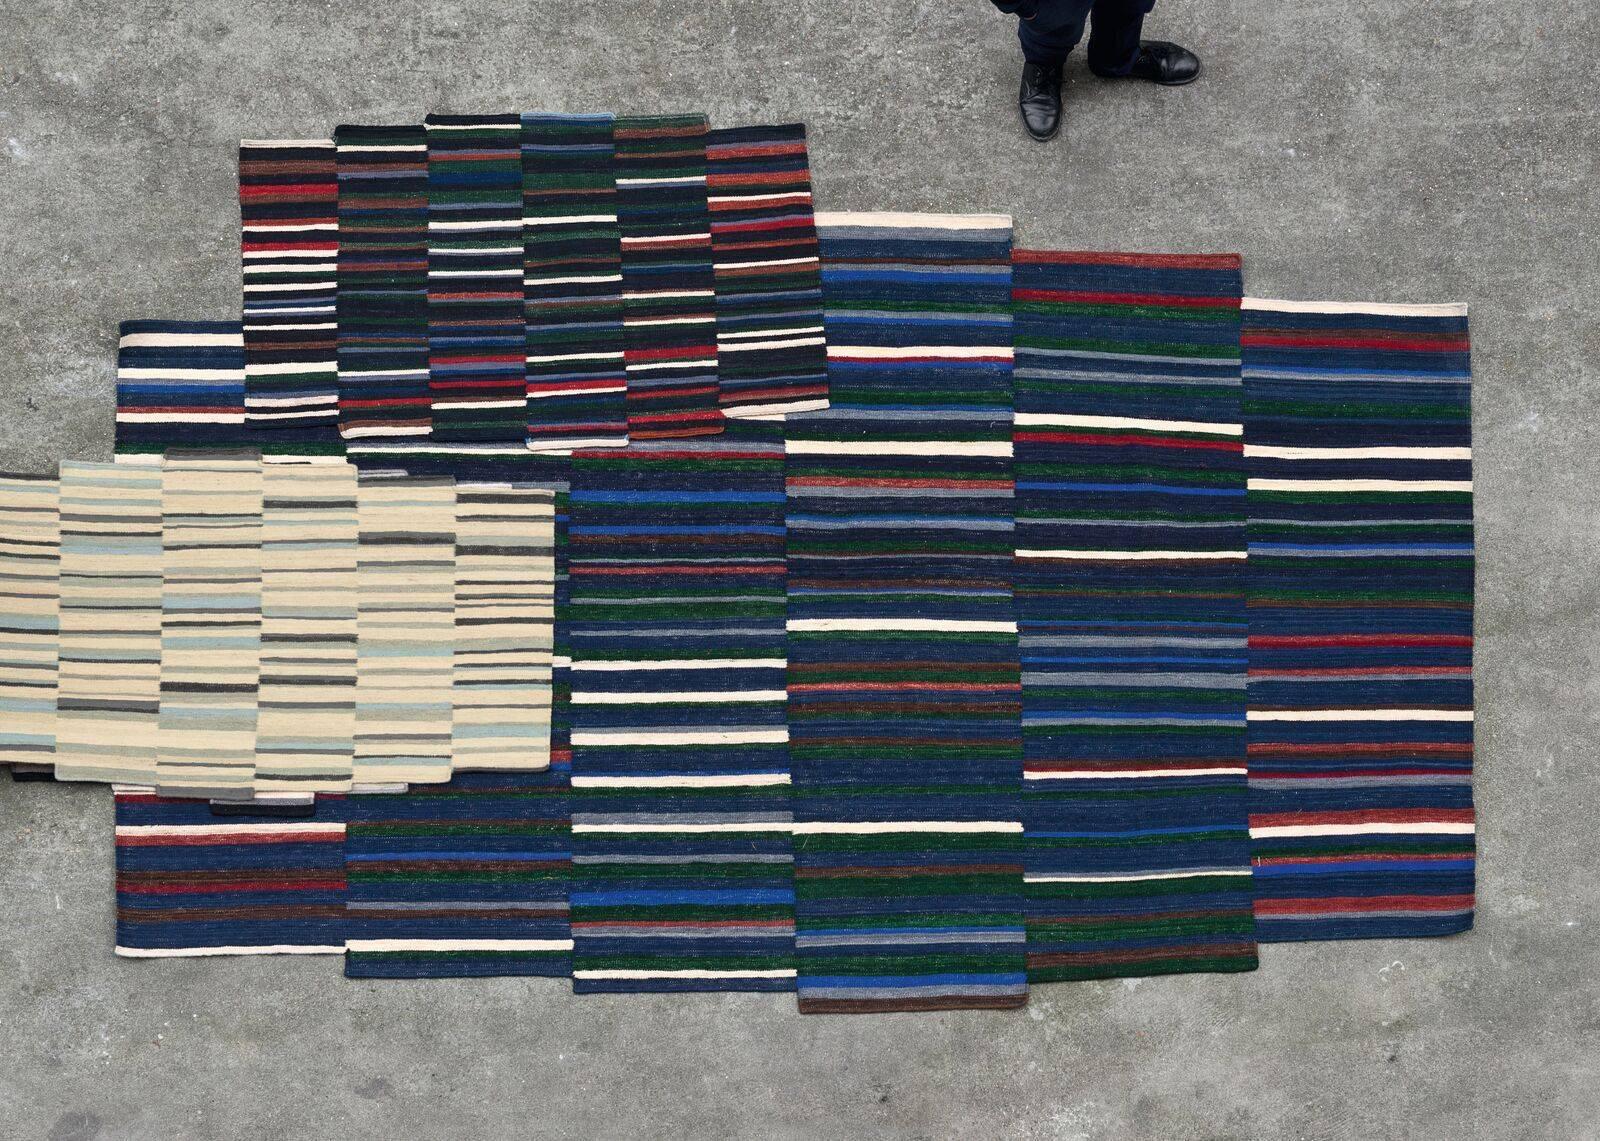 Hand-Crafted Lattice 1 Hand-Loomed Afghan Wool Rug by Ronan & Erwan Bouroullec, Large For Sale